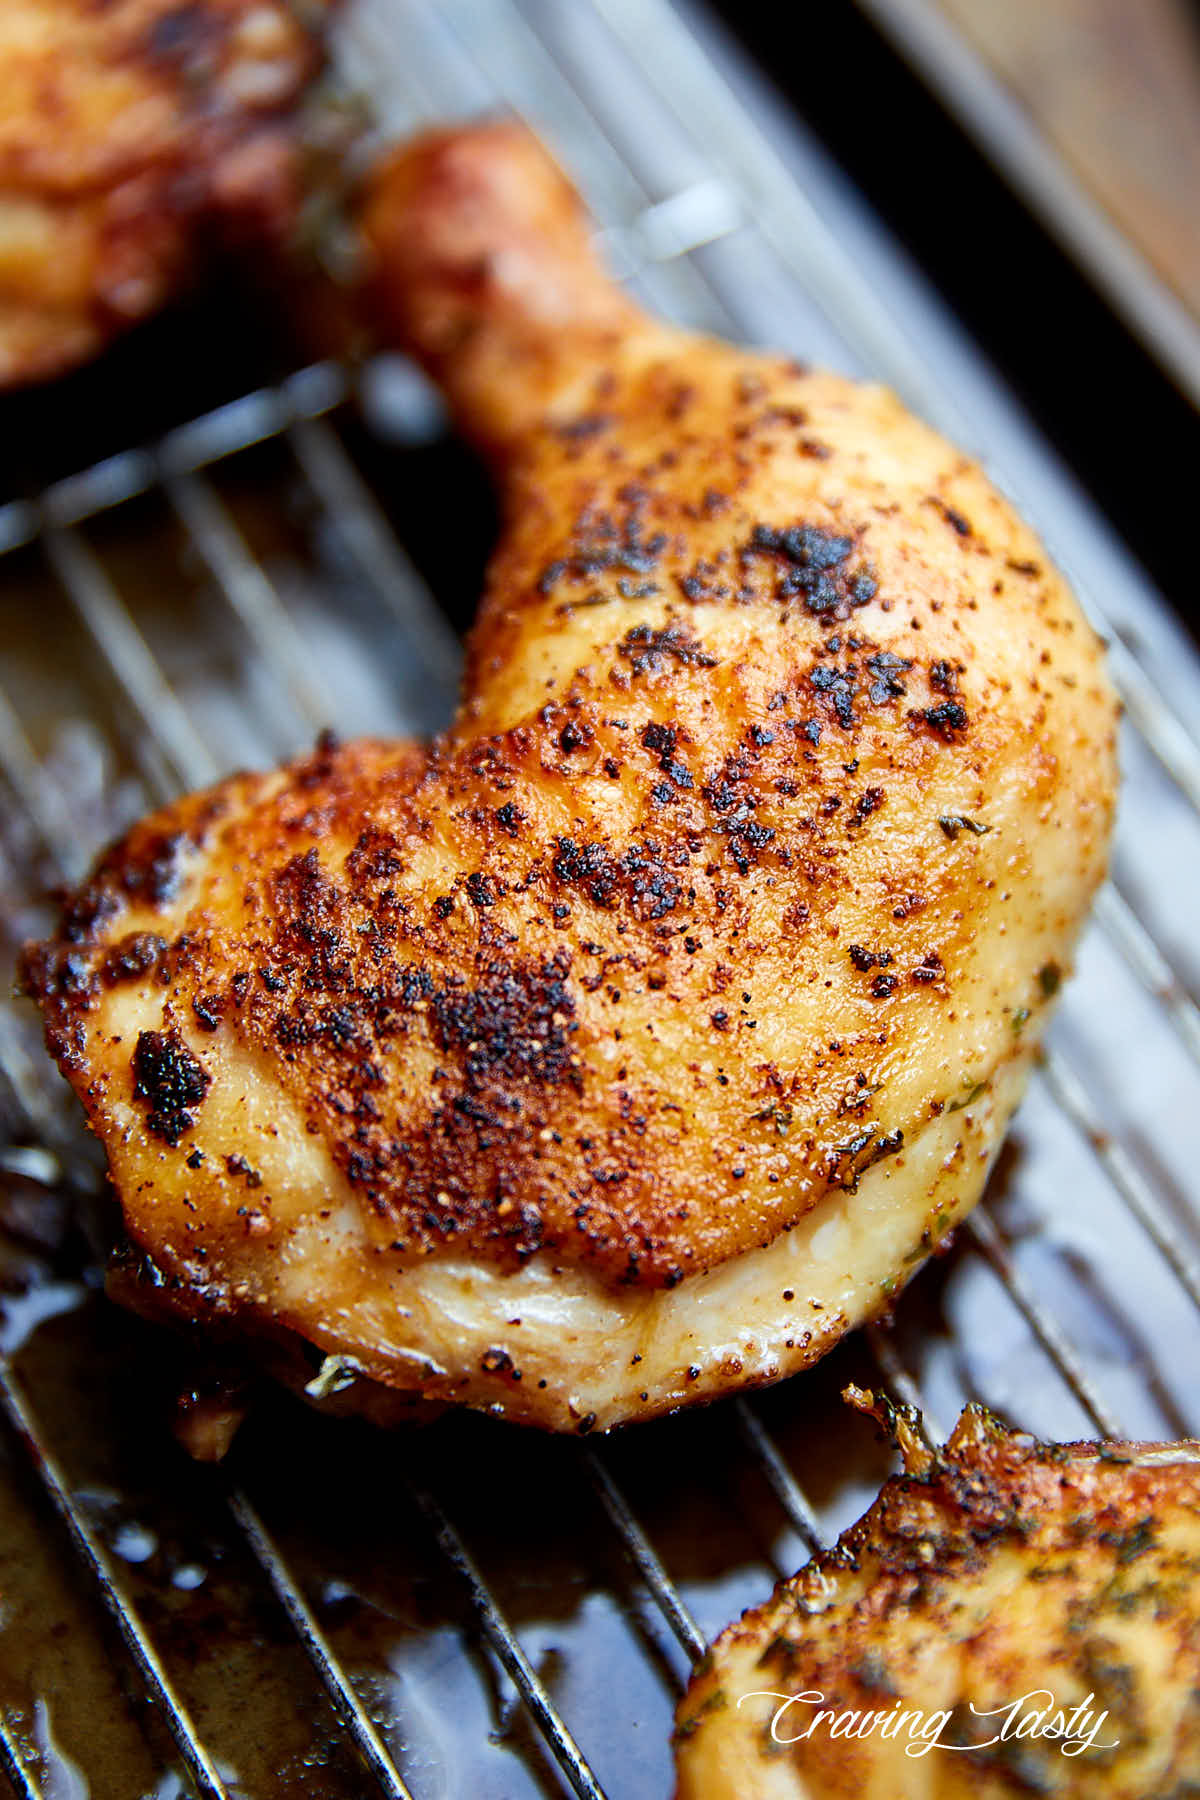 Crispy Oven Roasted Chicken Leg Quarters Craving Tasty,Distressed Kitchen Cabinets Images